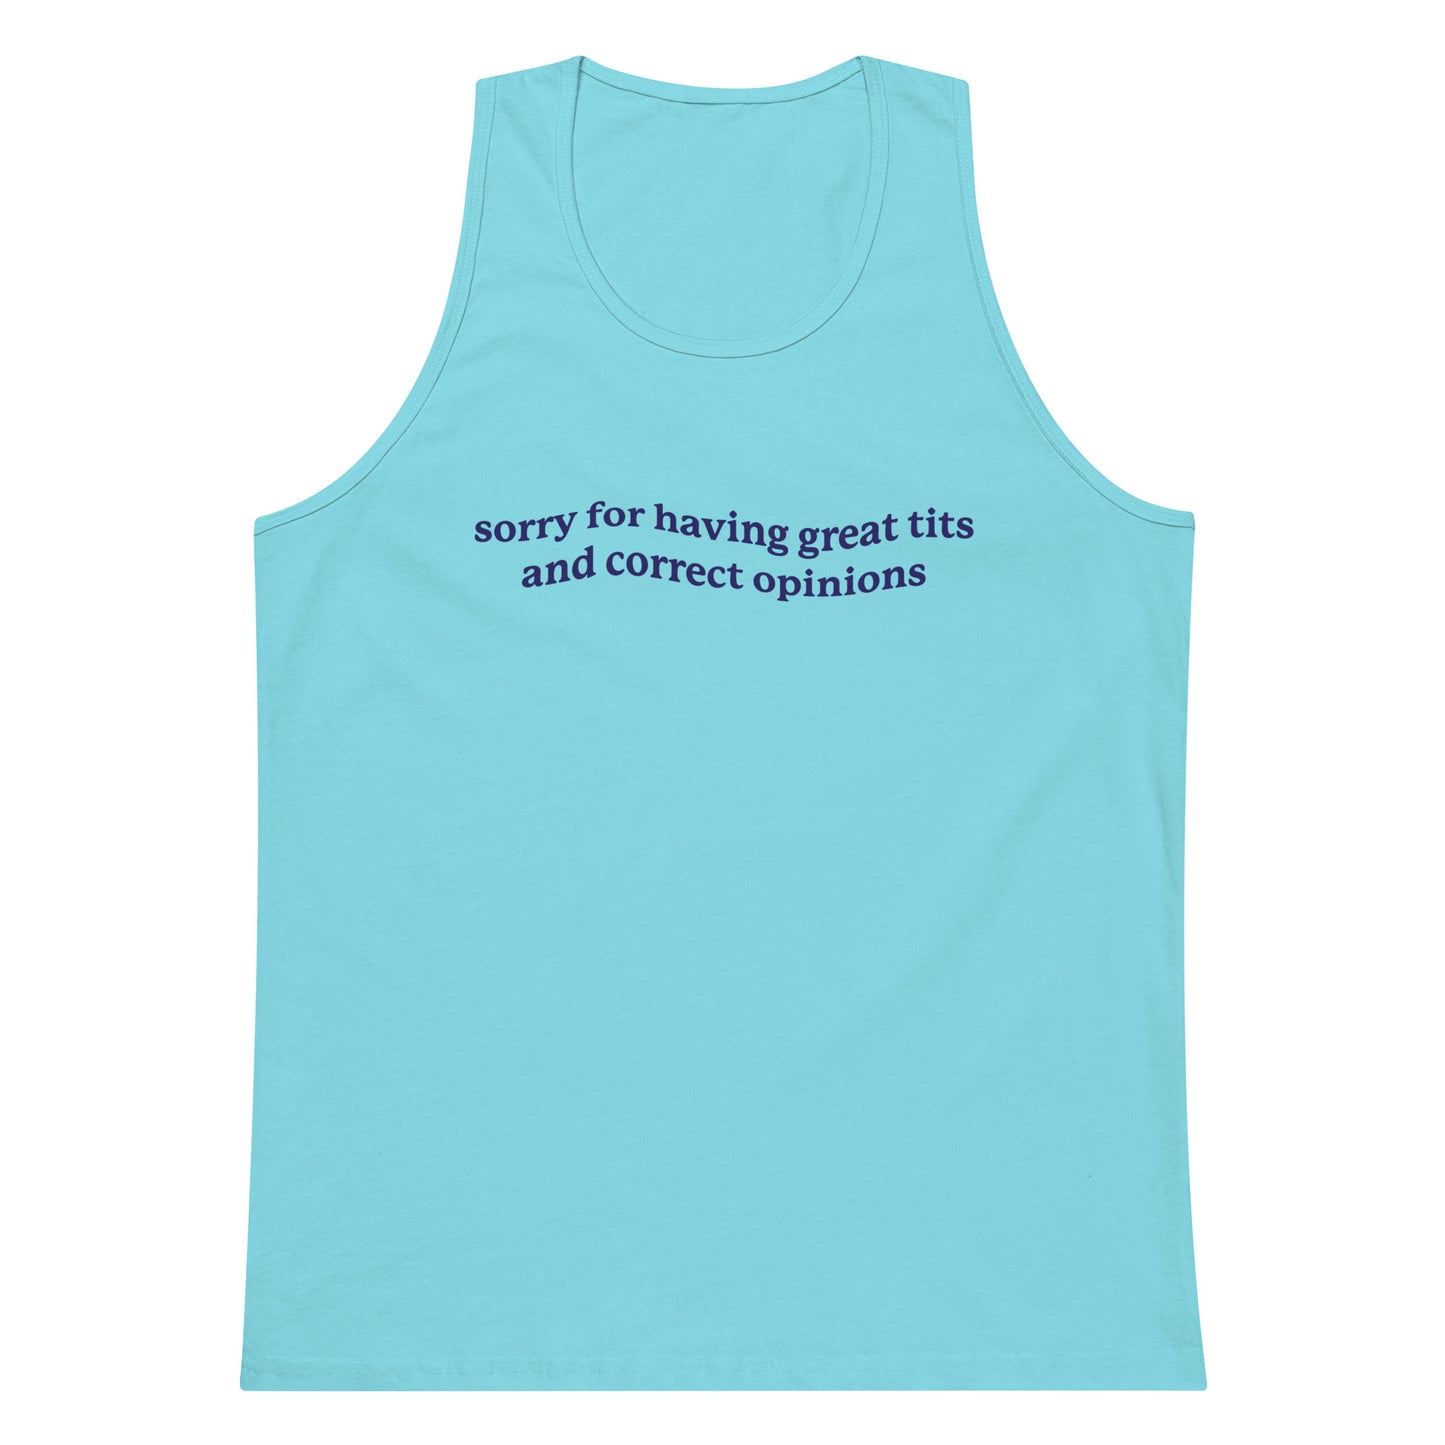 Great Tits & Correct Opinions tank top